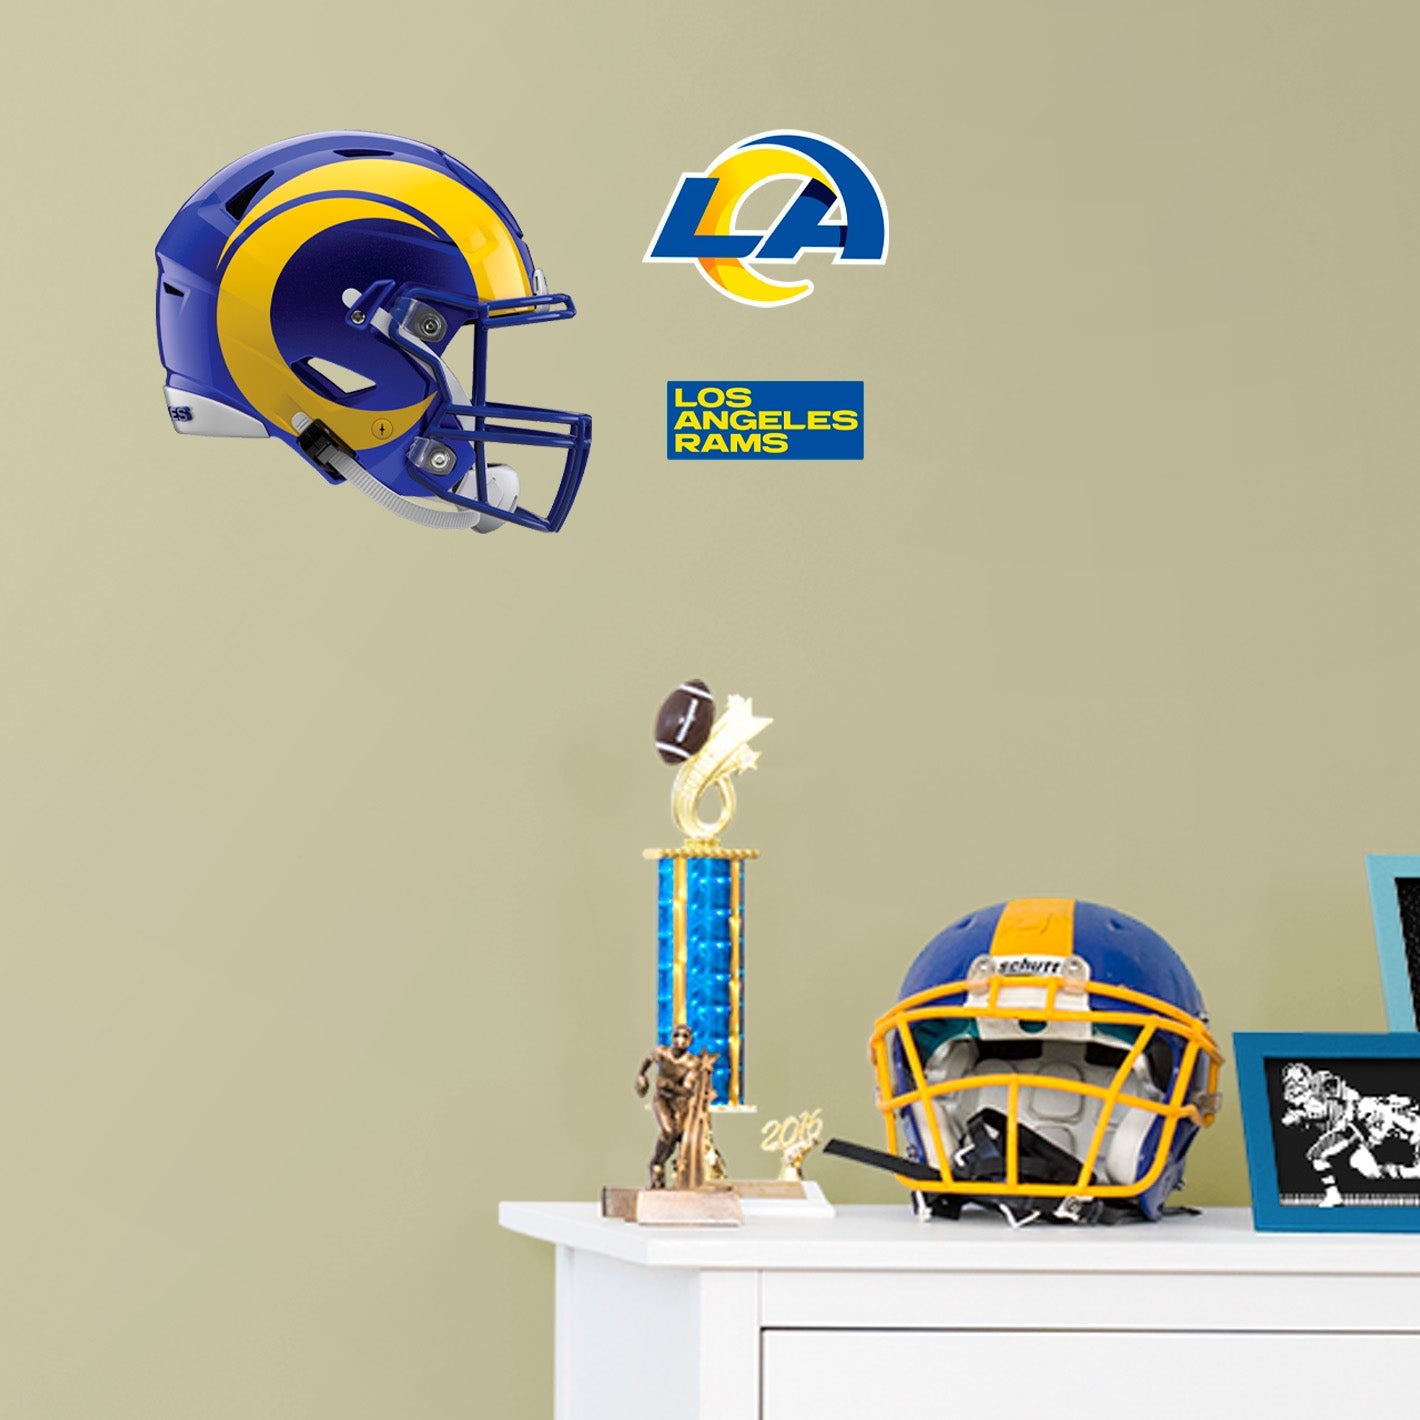 Los Angeles Rams: Helmet - Officially Licensed NFL Removable Adhesive Decal